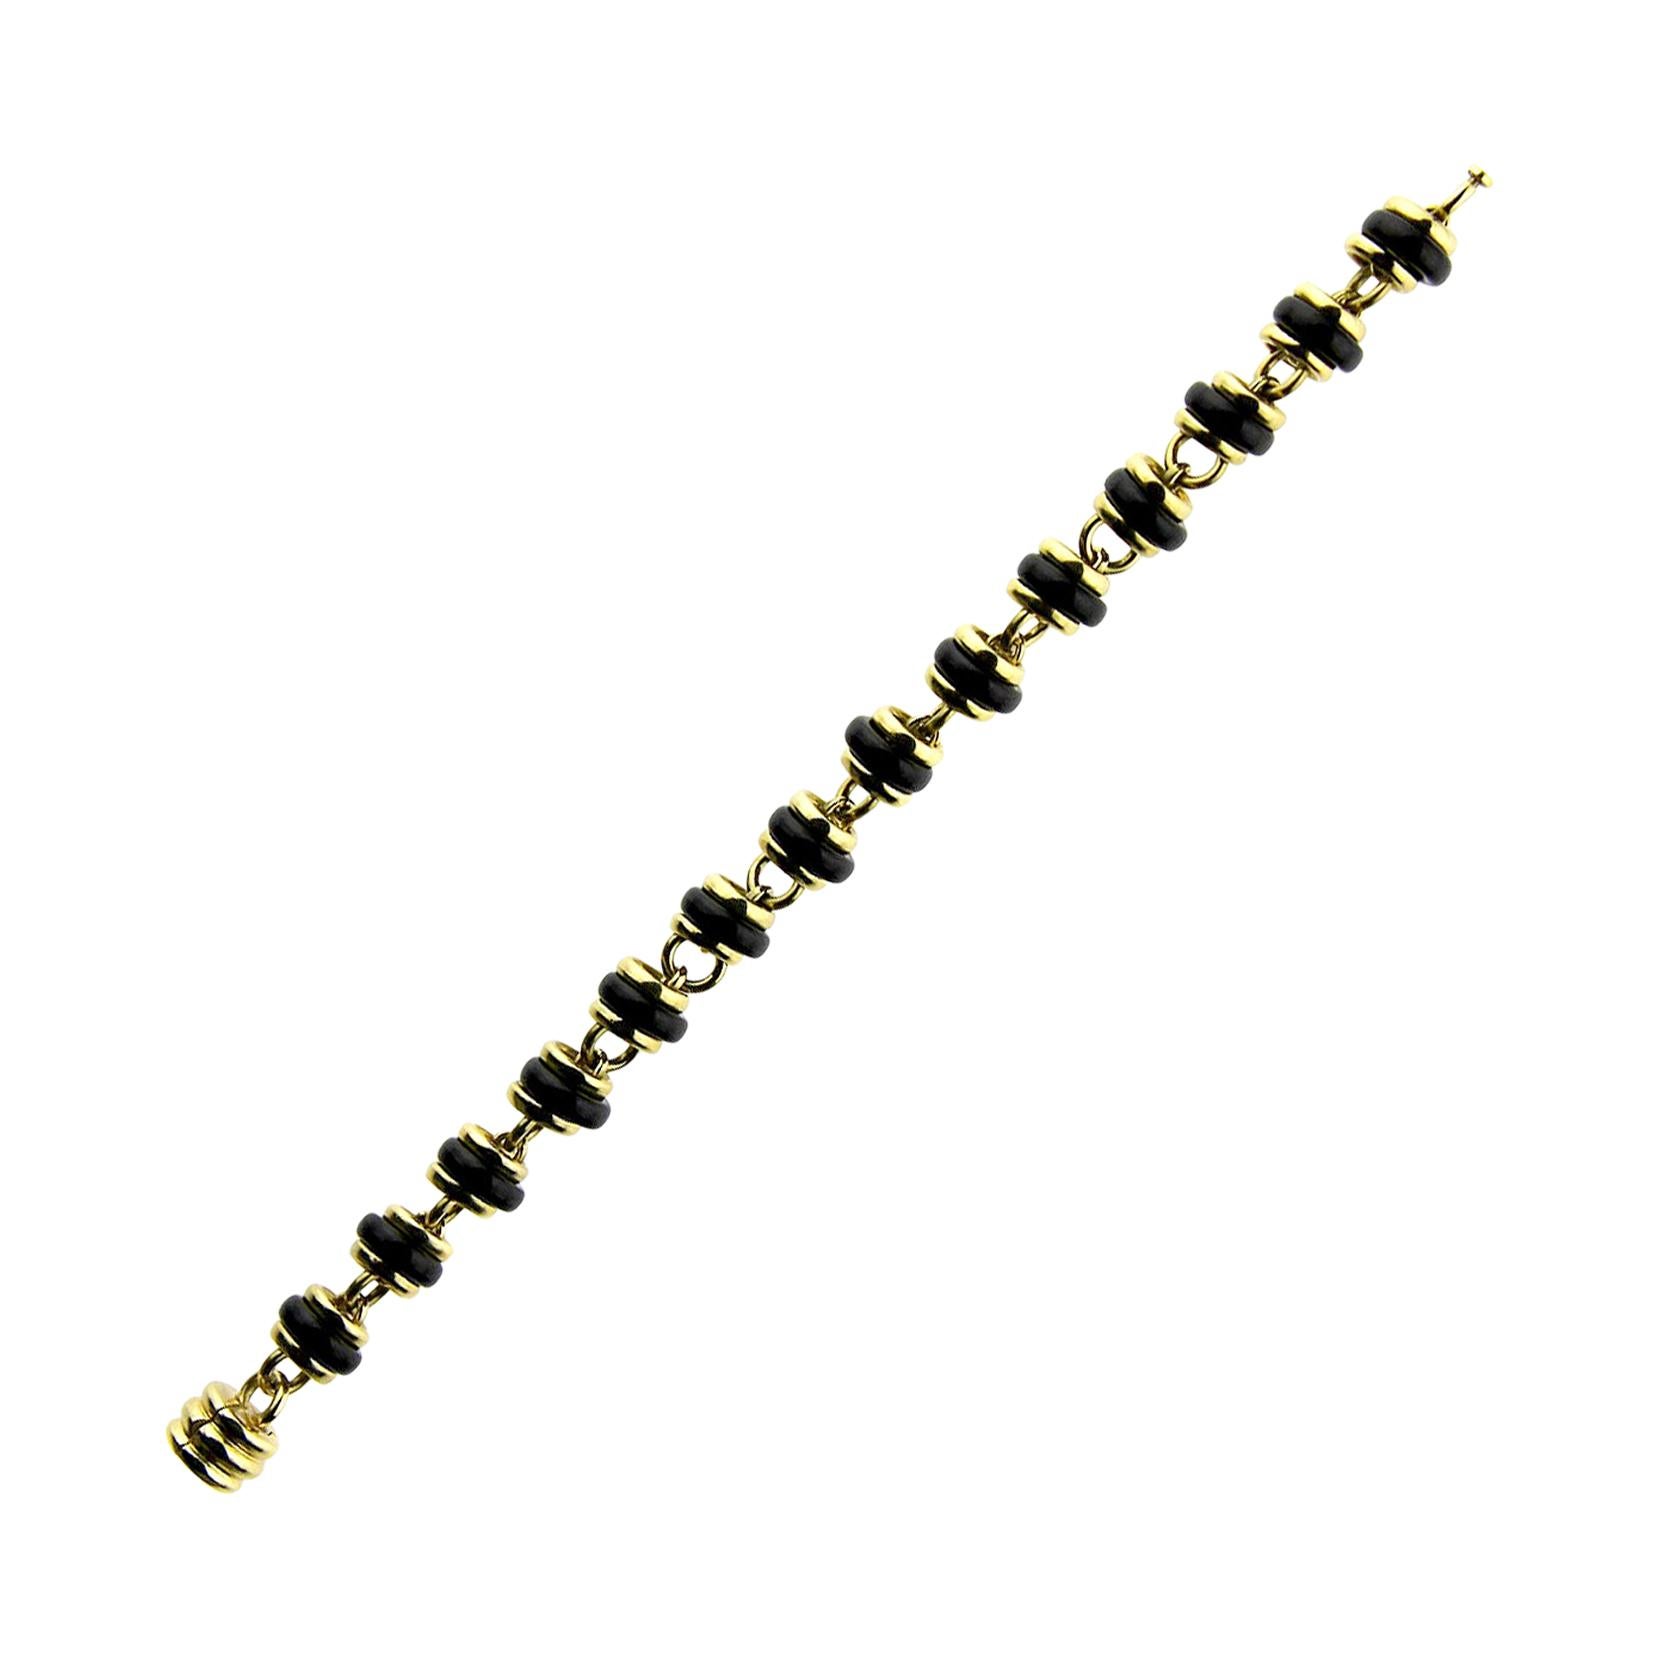 Pomellato Bracelet with Onyx Ring Beads and 18 Carat Yellow Gold